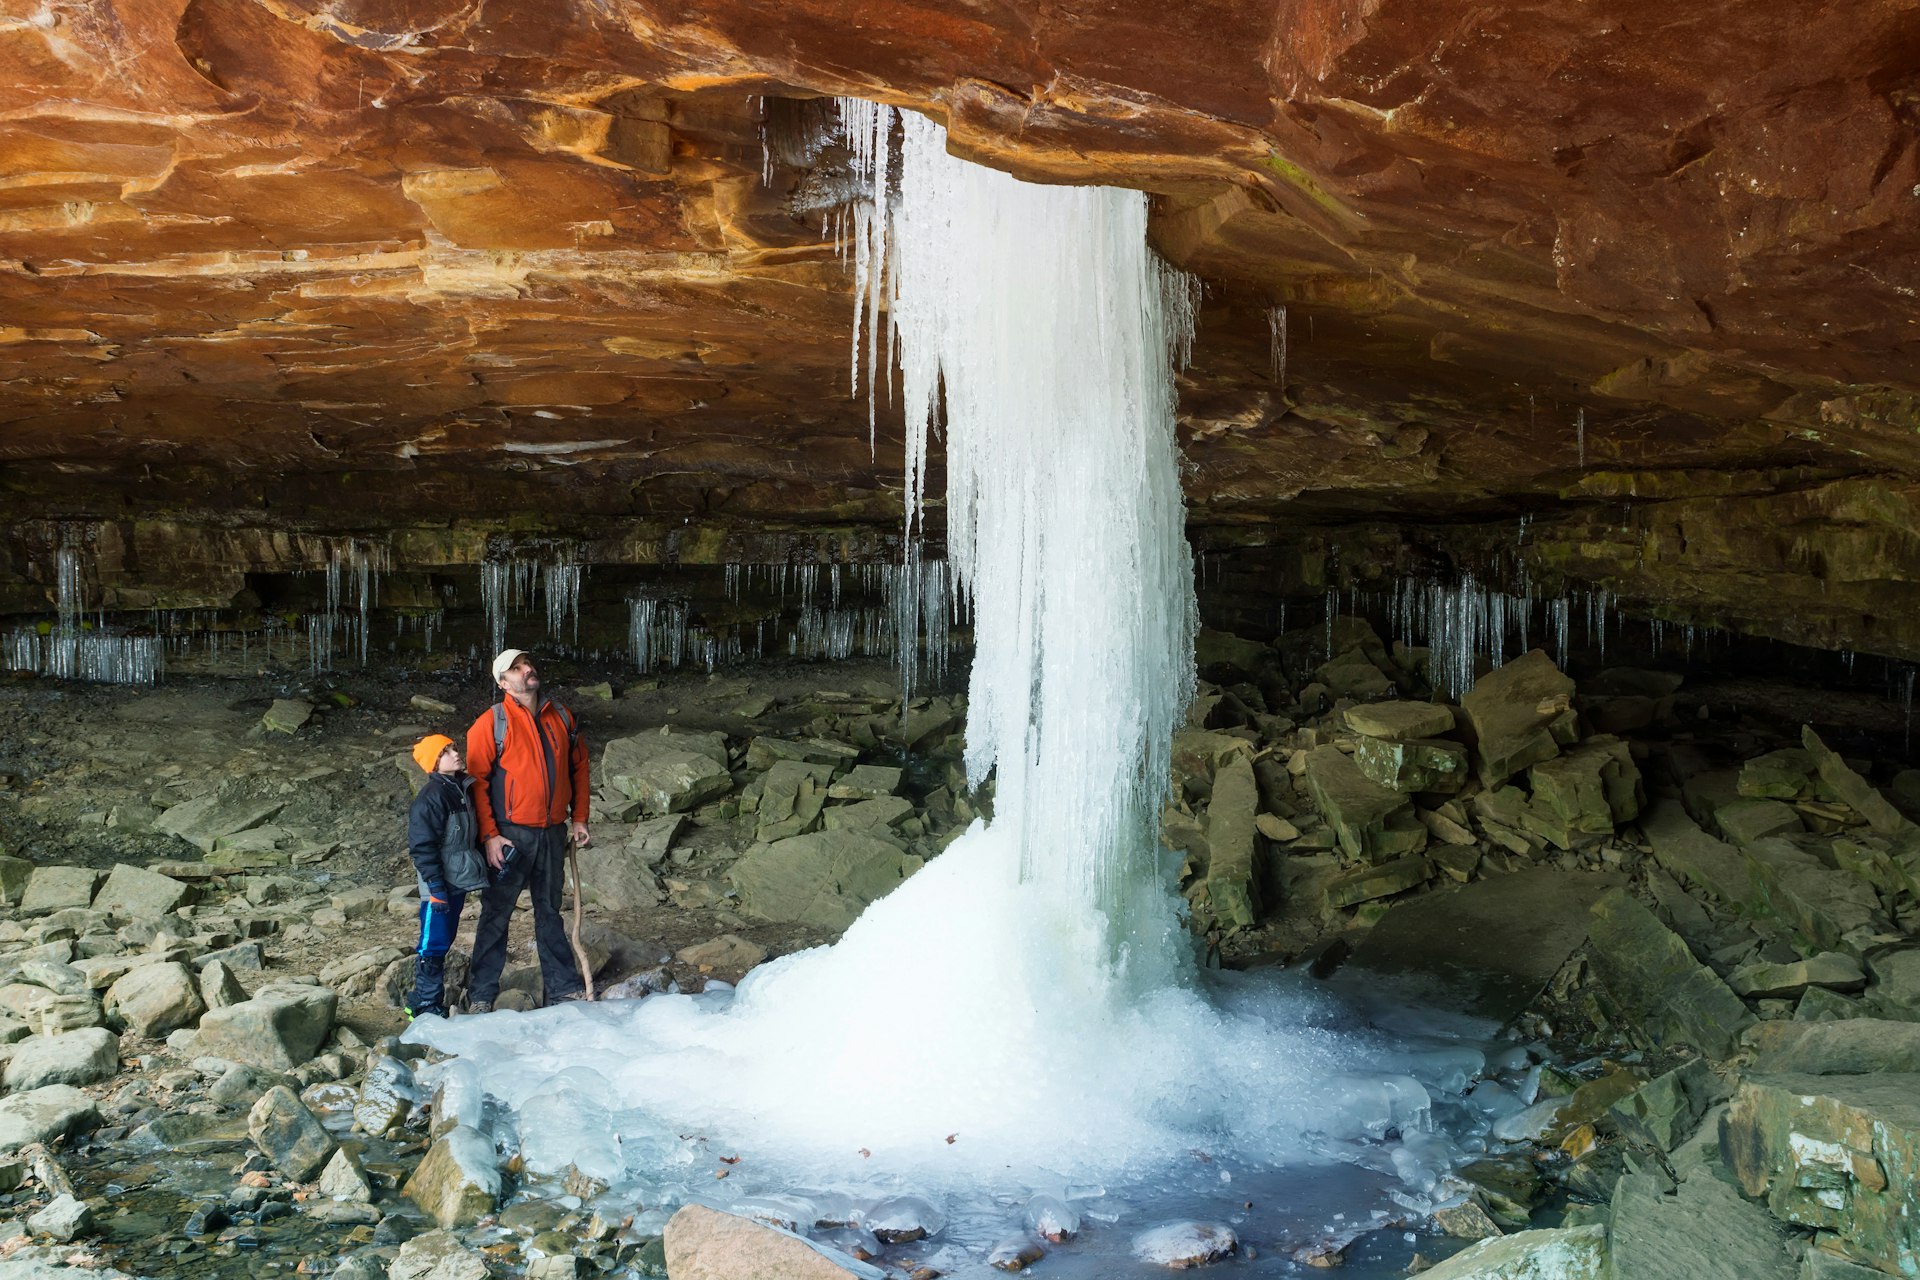 Father and son looking at the frozen waterfall at Glory Hole Falls, Arkansas, USA